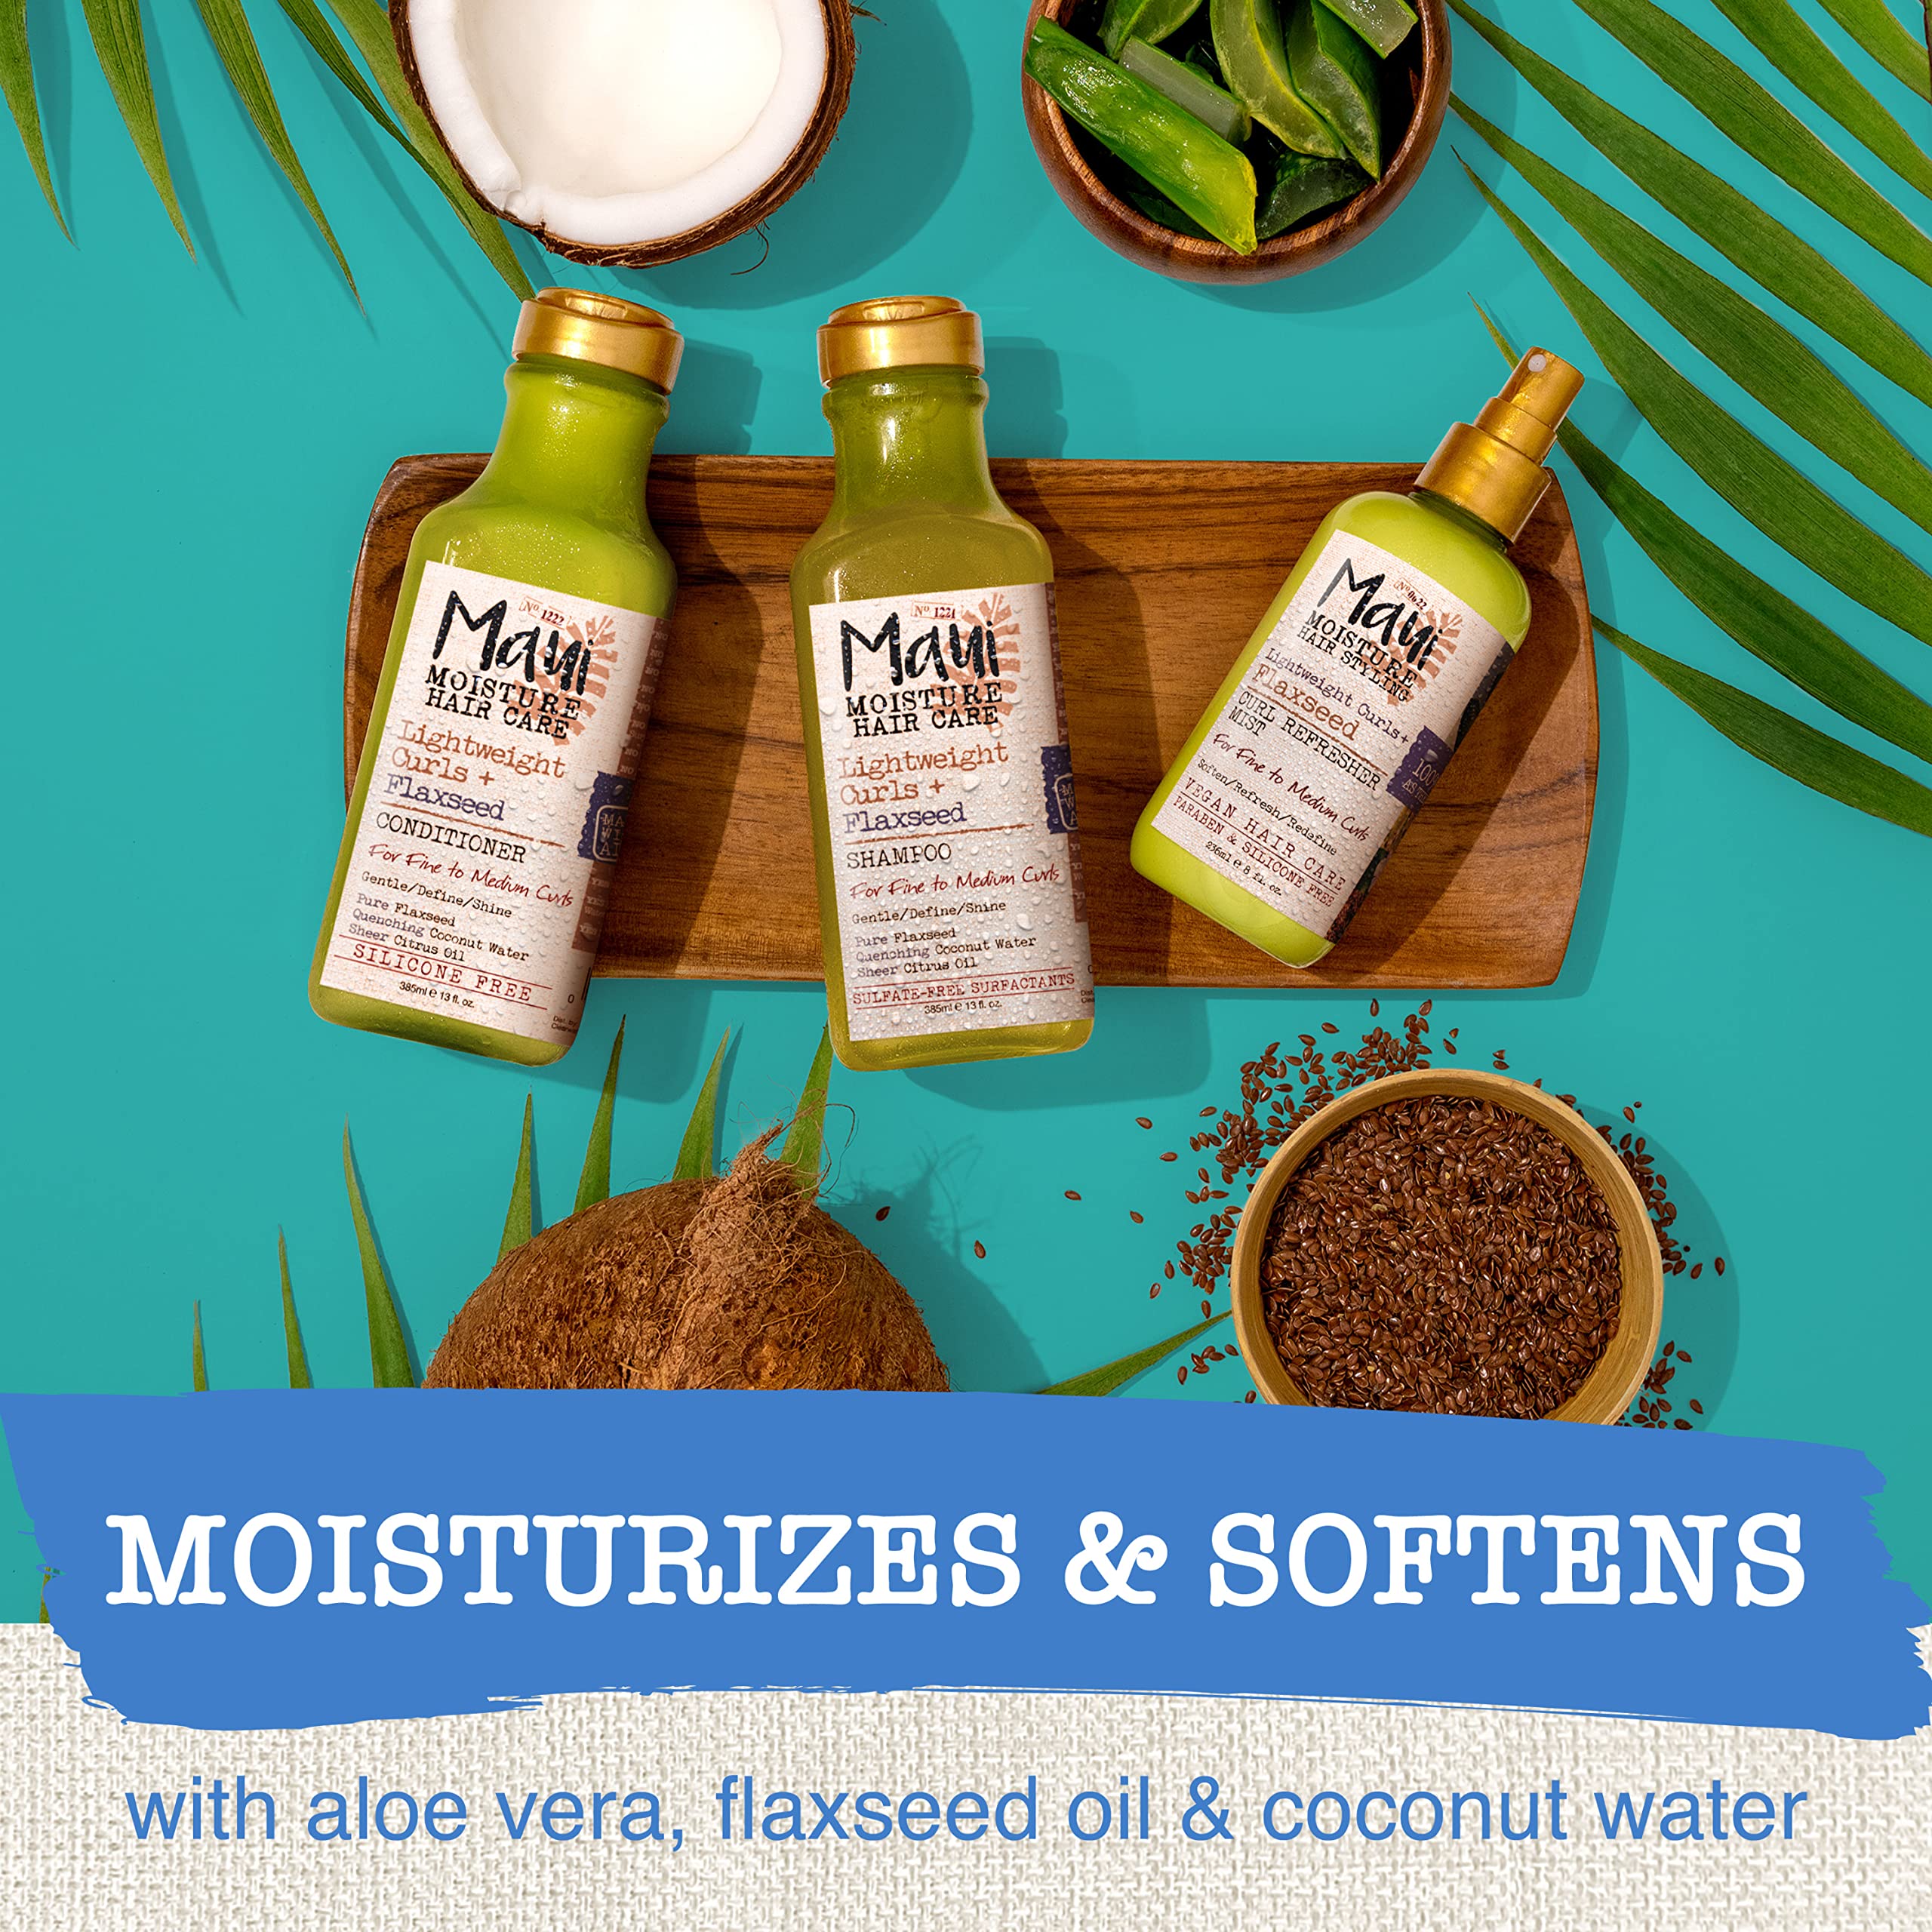 Maui Moisture Lightweight Curls + Flaxseed Conditioner, Conditioning, Paraben Free, Silicone Free, 13 Fl Oz